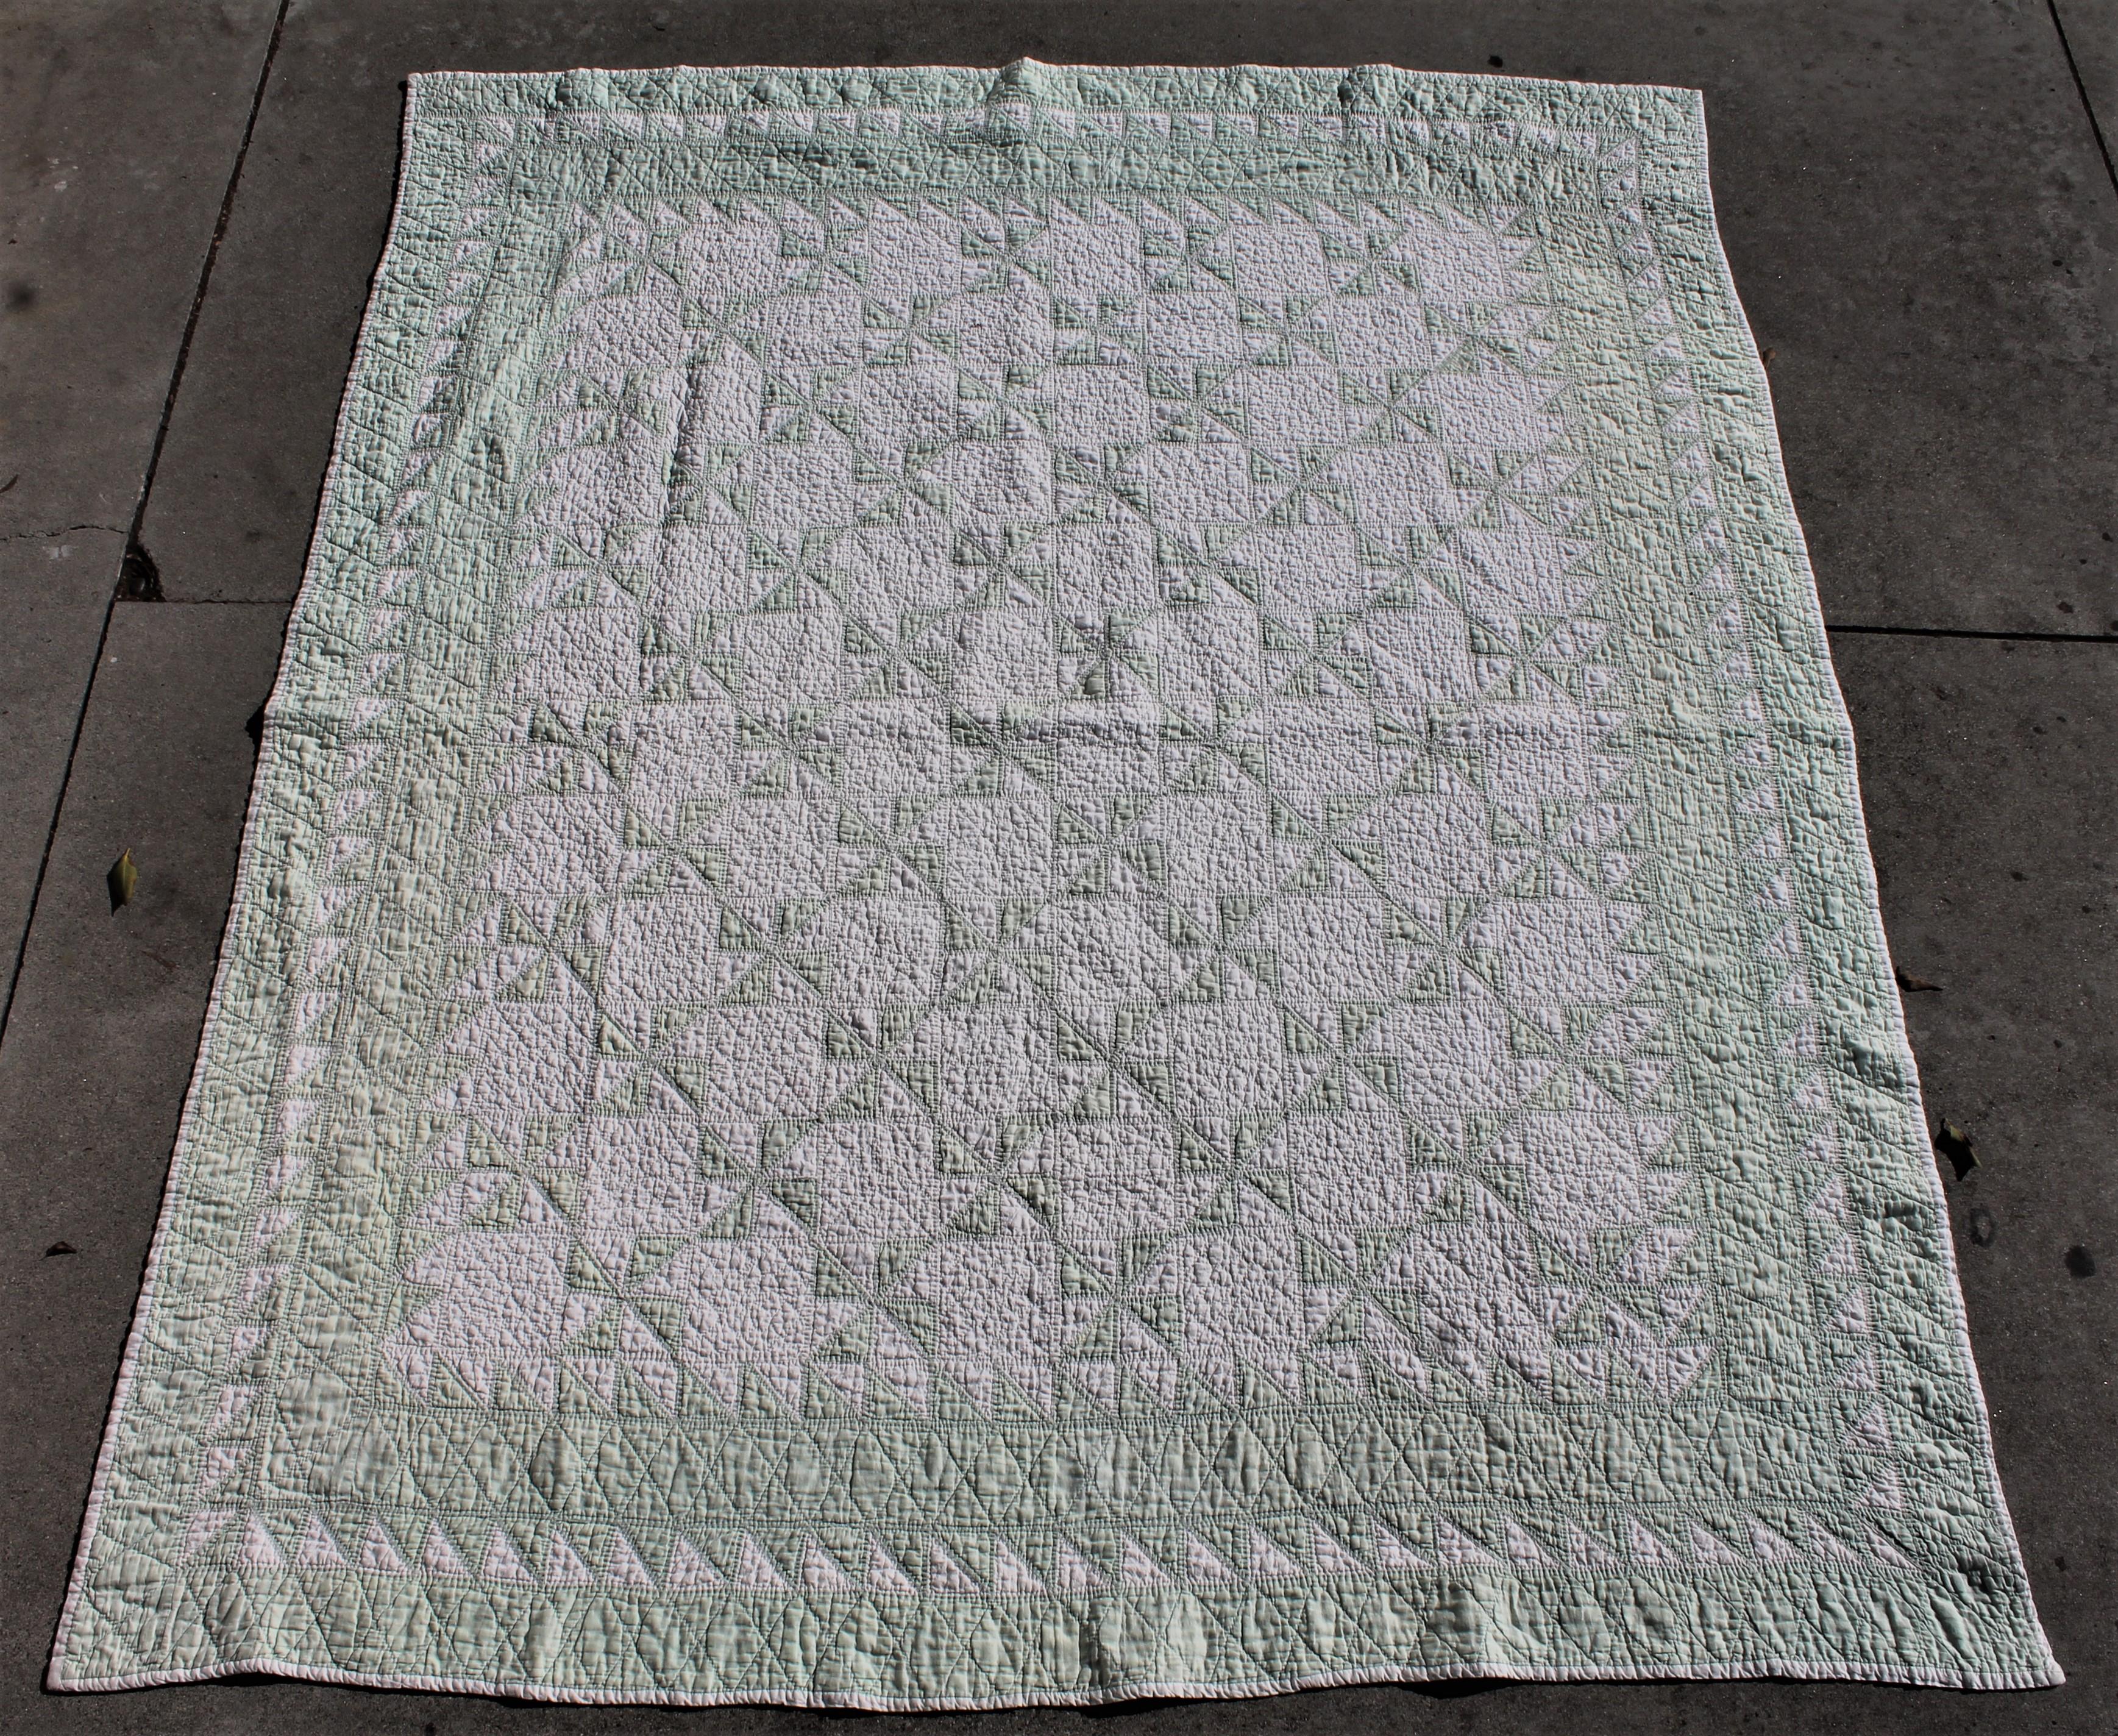 This fine small pin wheels quilt is a light green with a inner saw tooth border. Over light faded through out the body of the quilt.